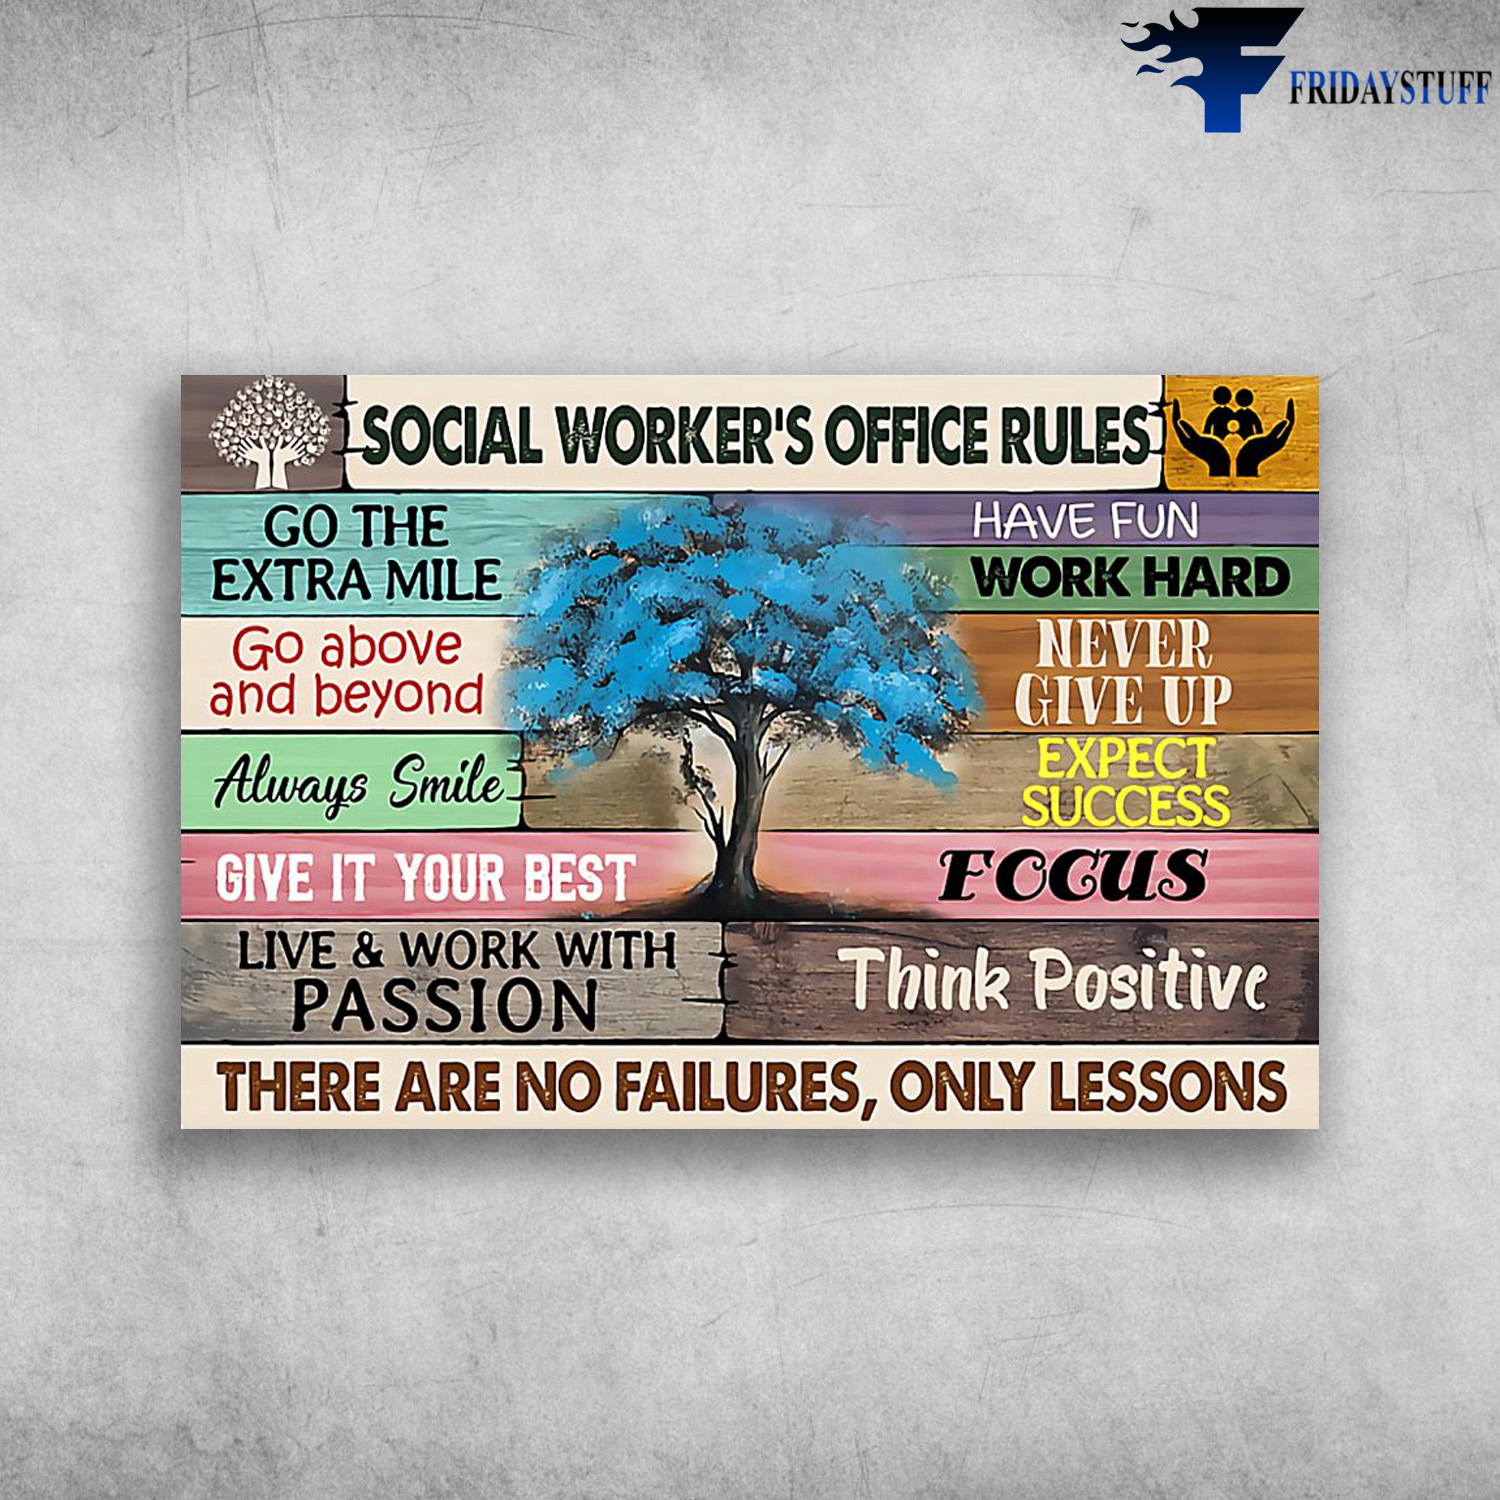 Social Worker's Office Rules - Go the Extra Mile, Go Above And Beyond, Always Smile, Give It Your Best, Live And Work With Passion